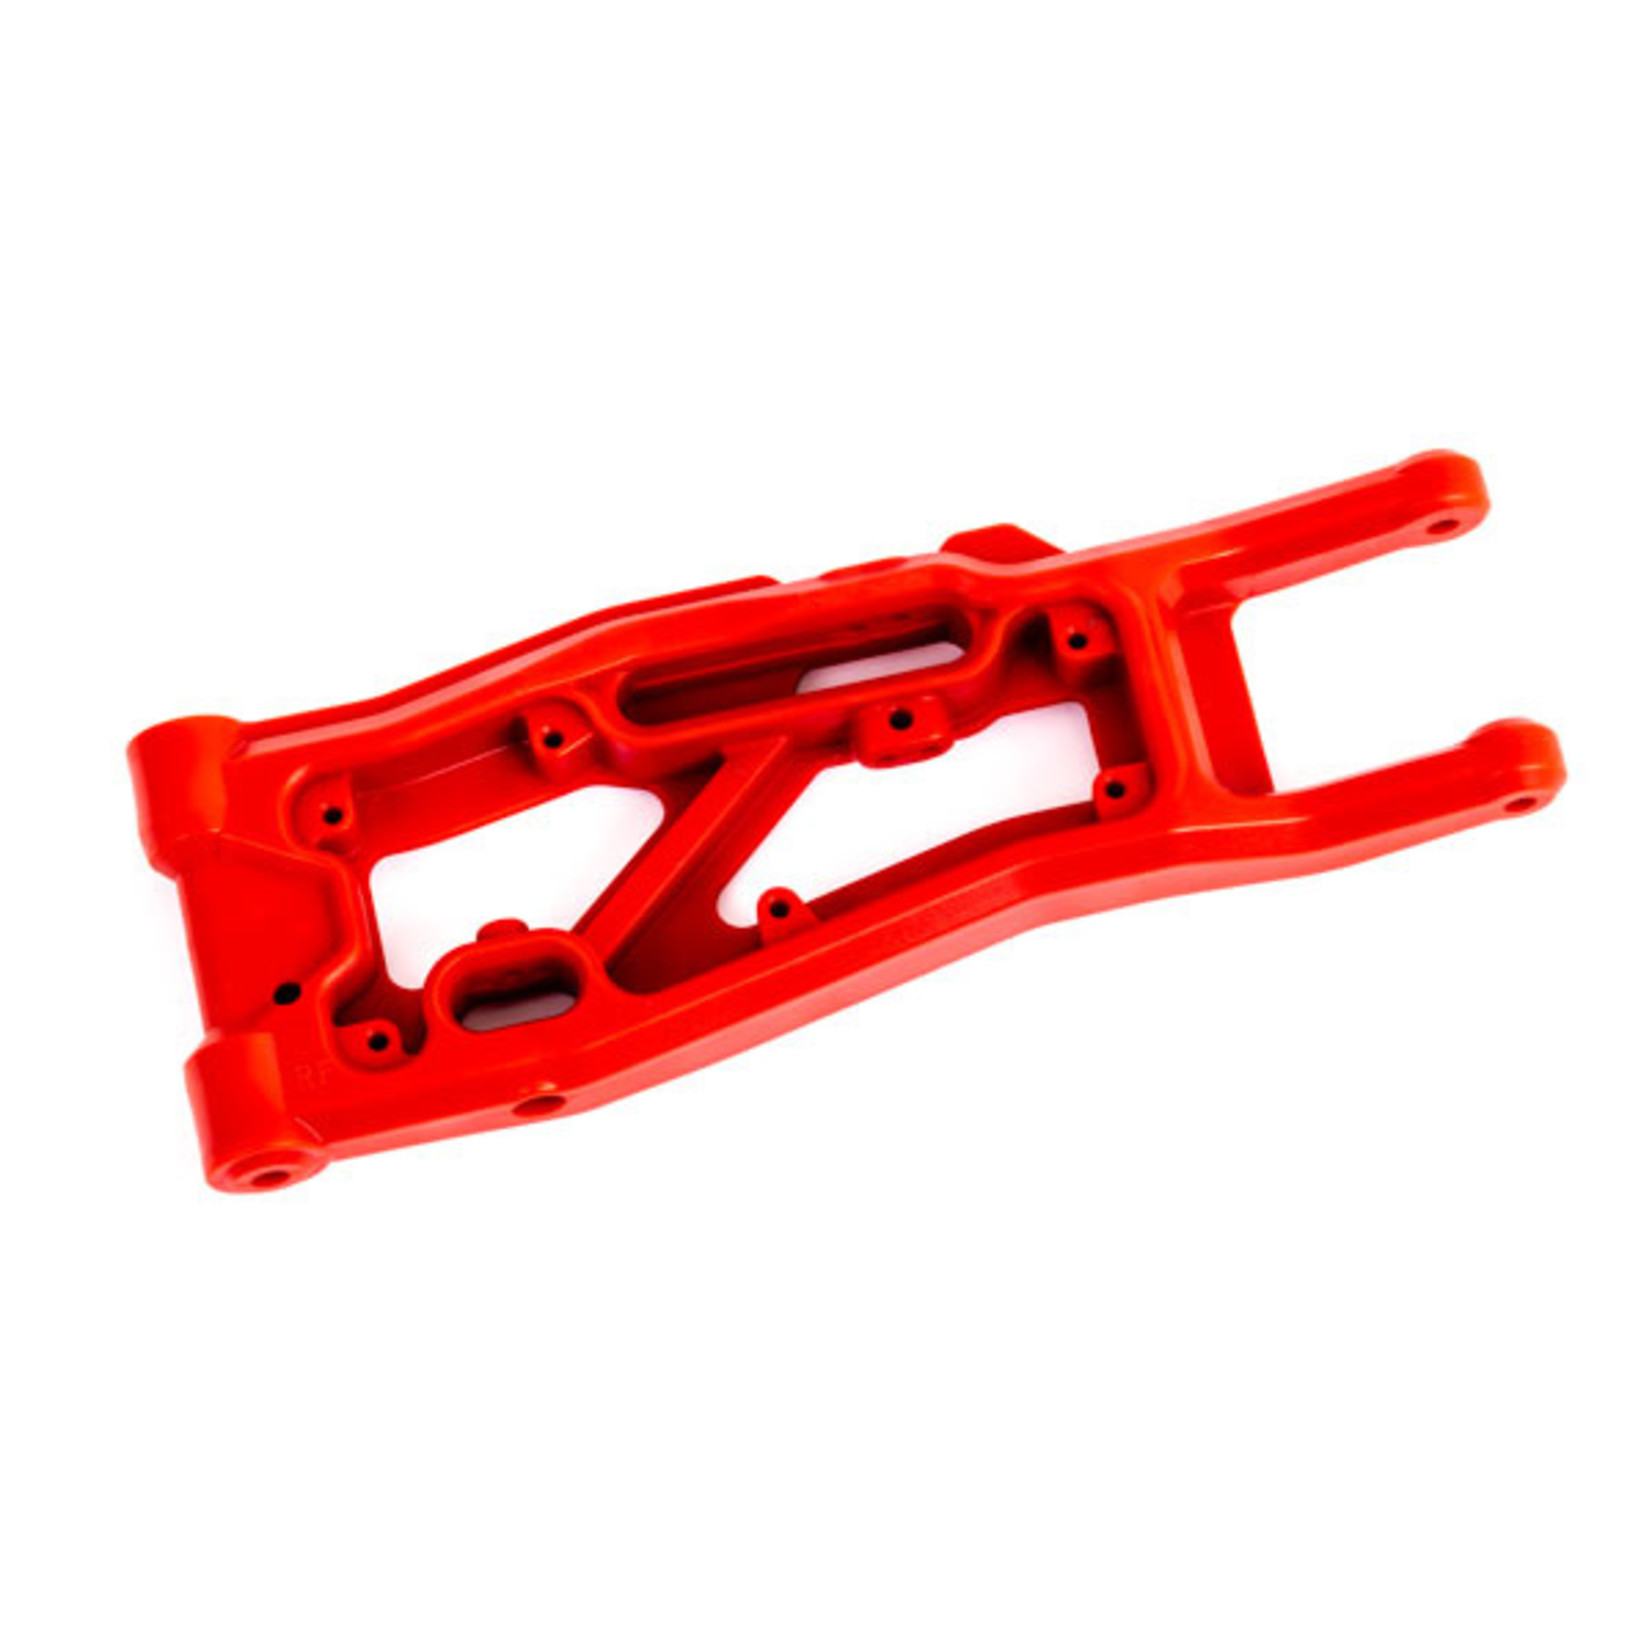 Traxxas 9530R - Suspension arm, front (right), red